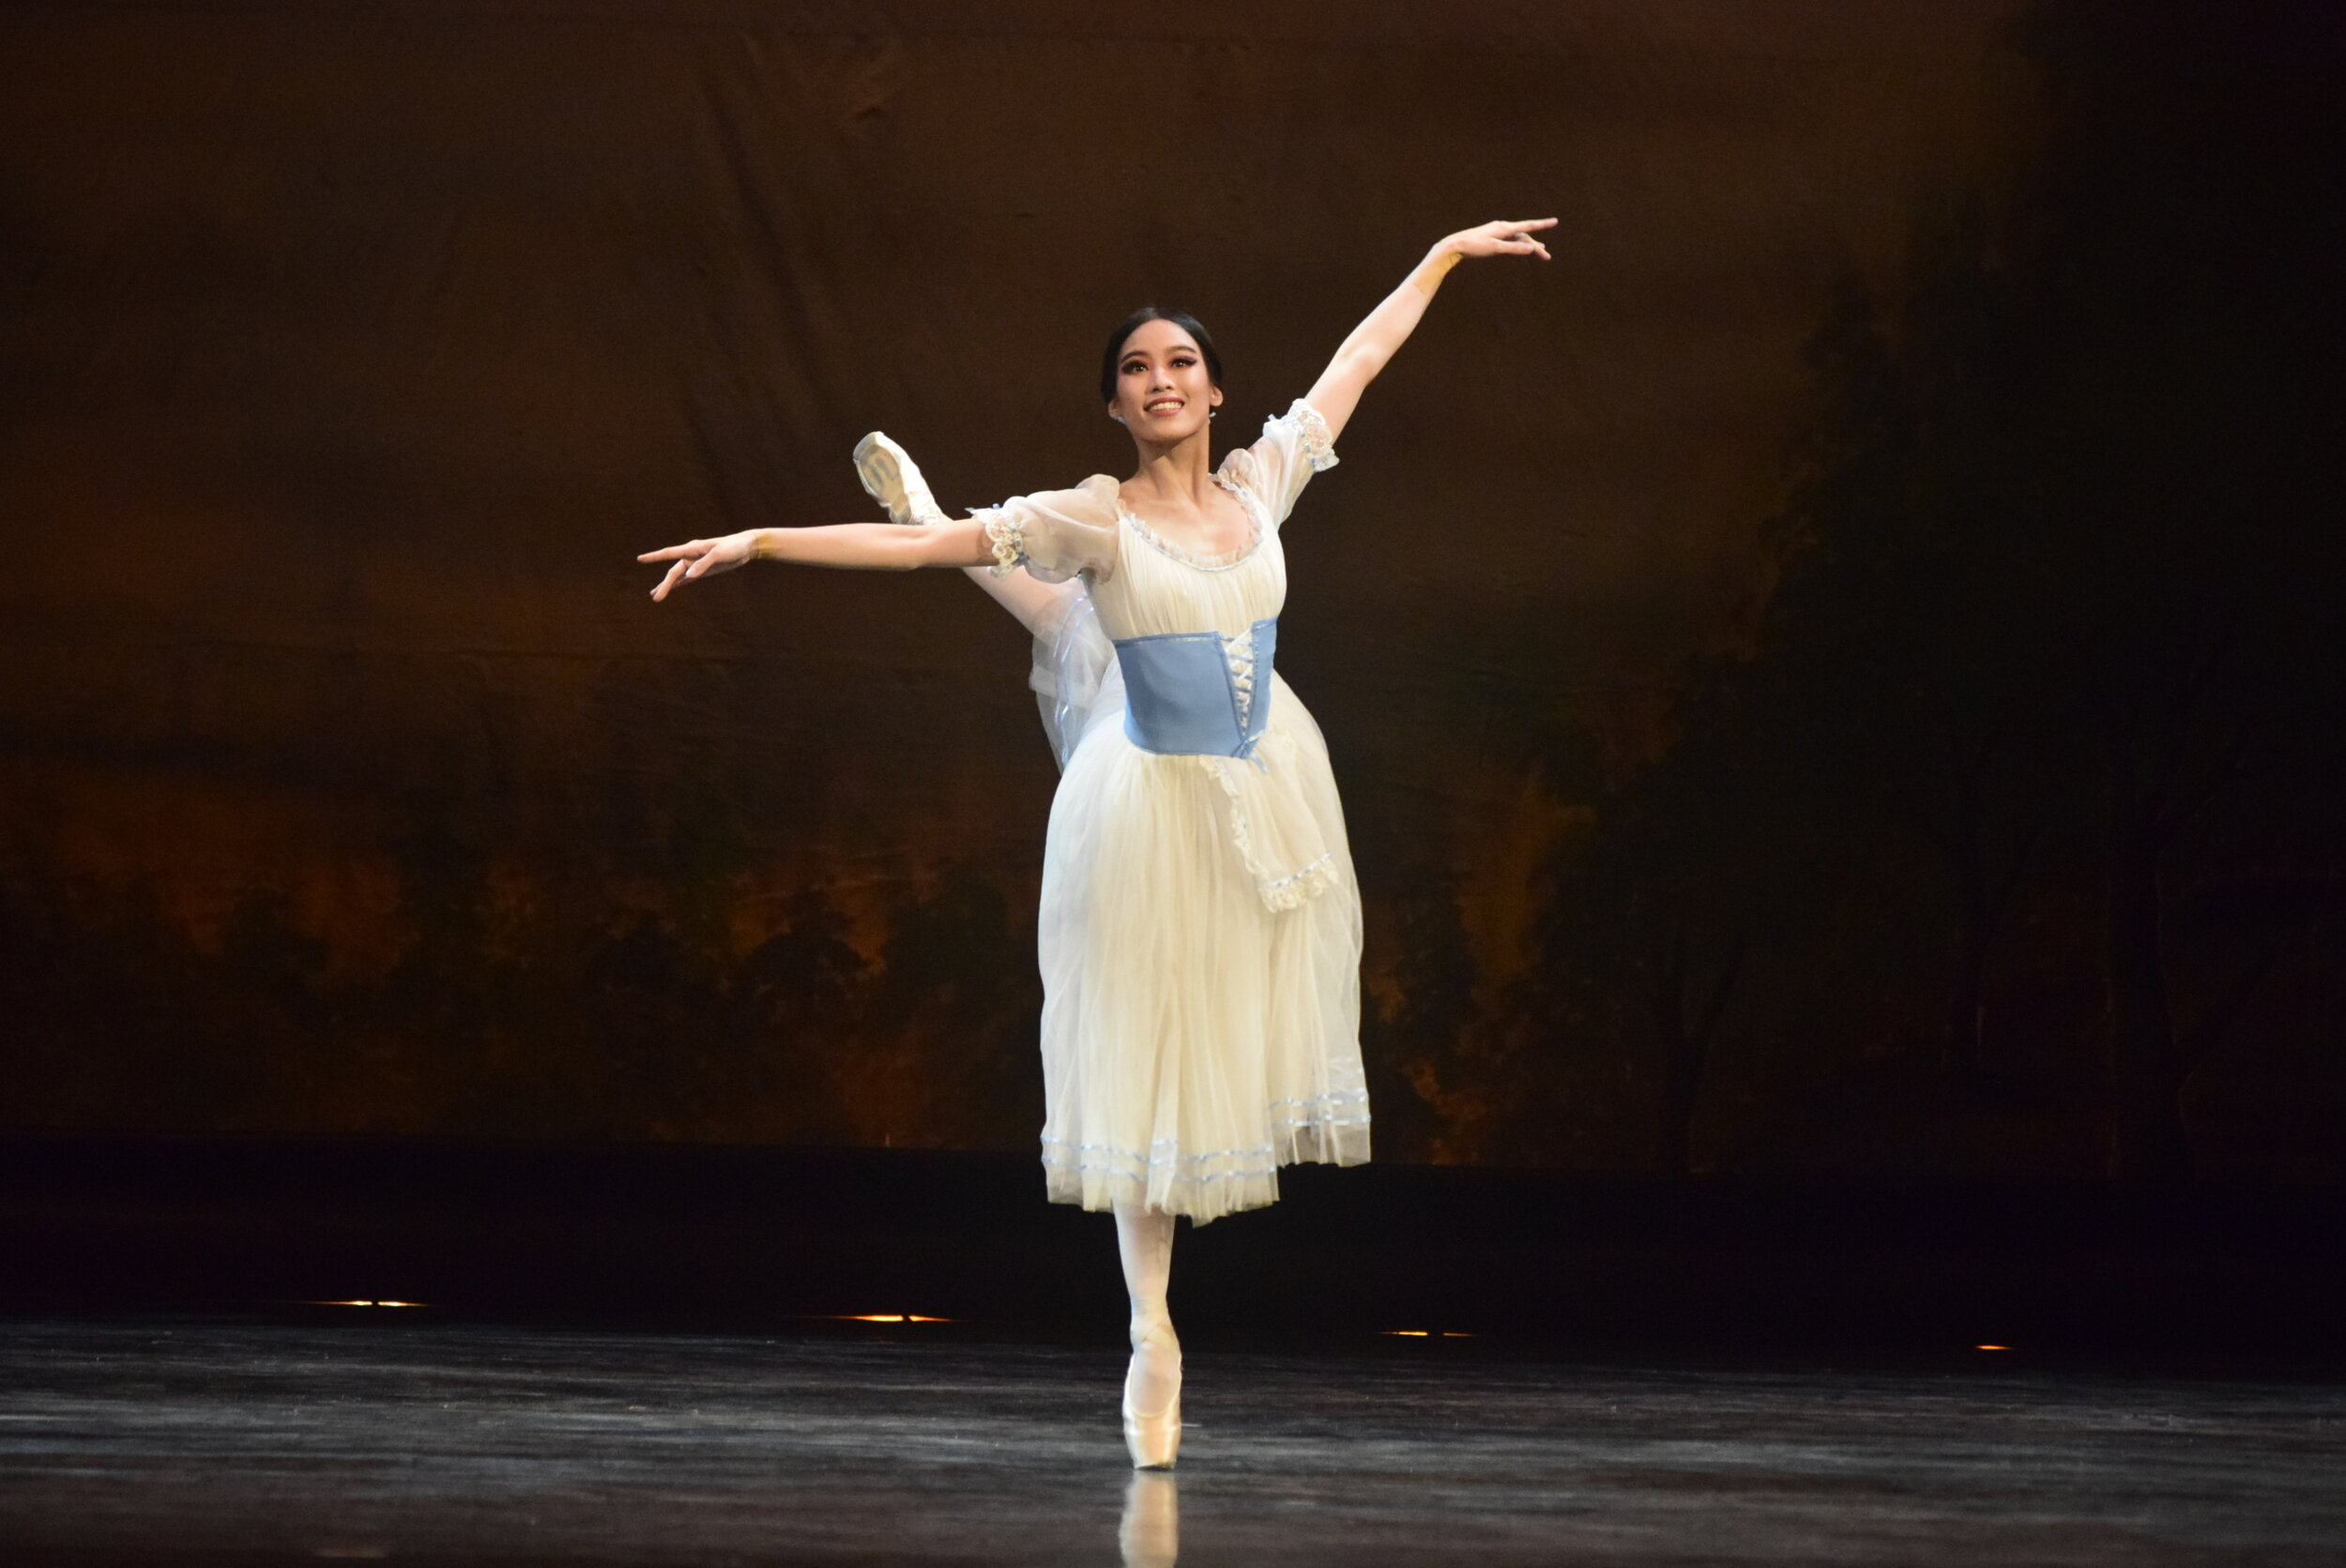   Giselle (Joan Emery Sia) wears a dainty white dress with eye-catching accents in delicate blue in Act 1 of  Giselle , 2019. Photo by Erickson Dela Cruz  